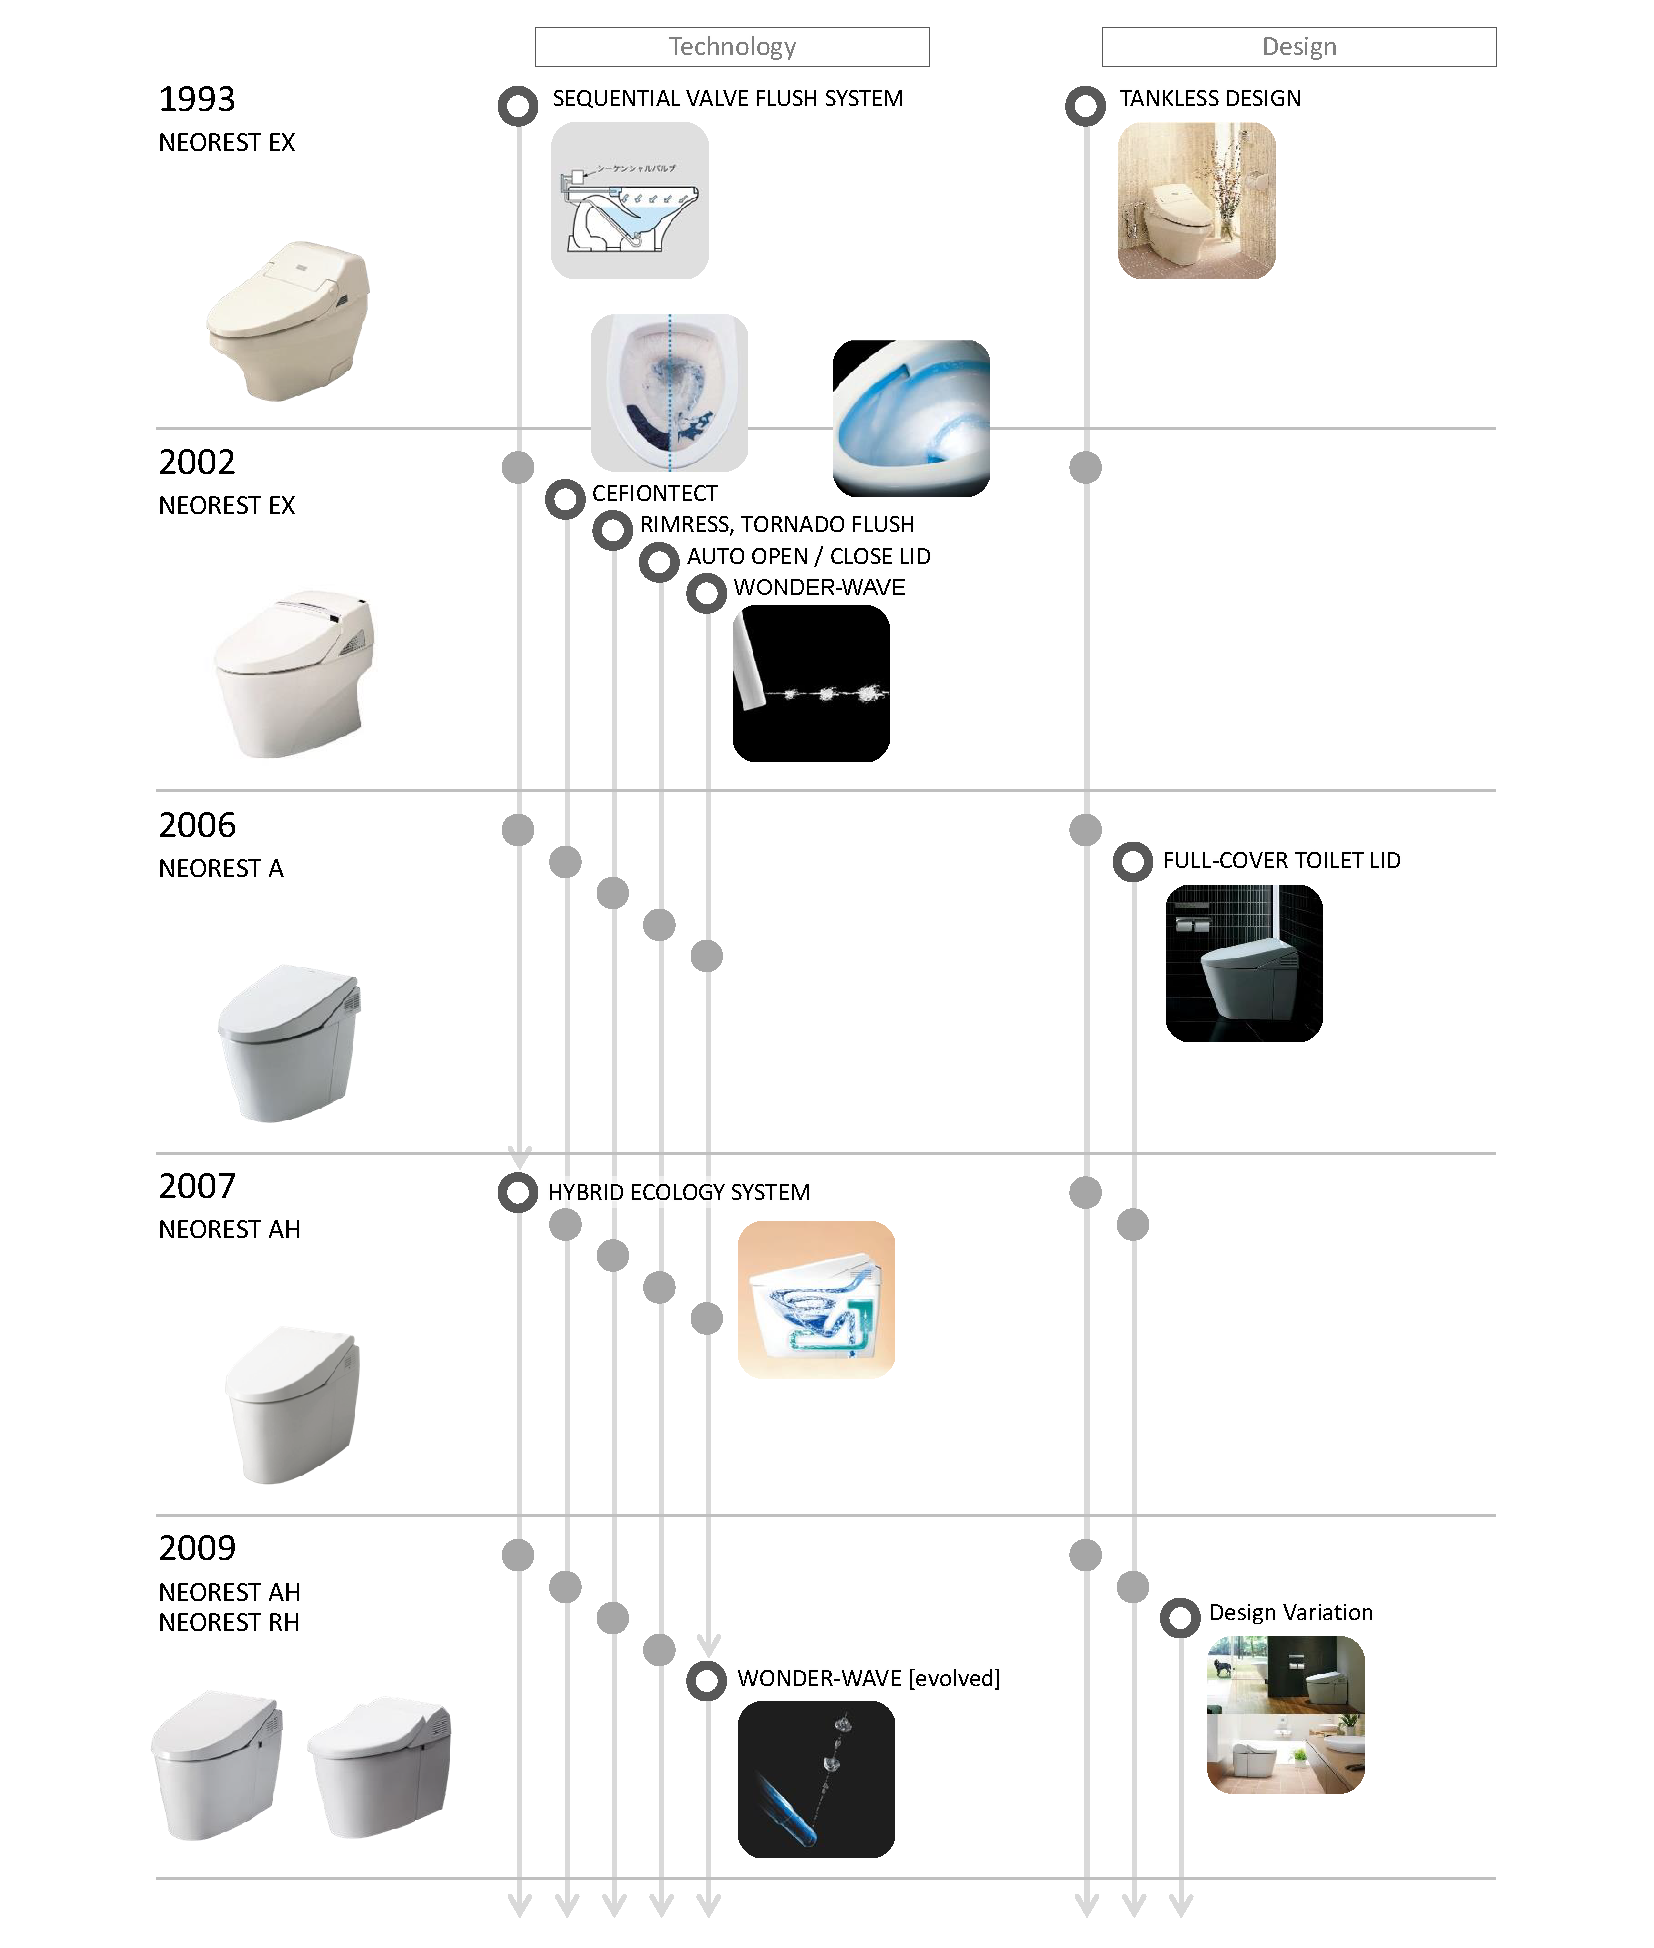 Evolution of NEOREST Technology and Design Pic 1